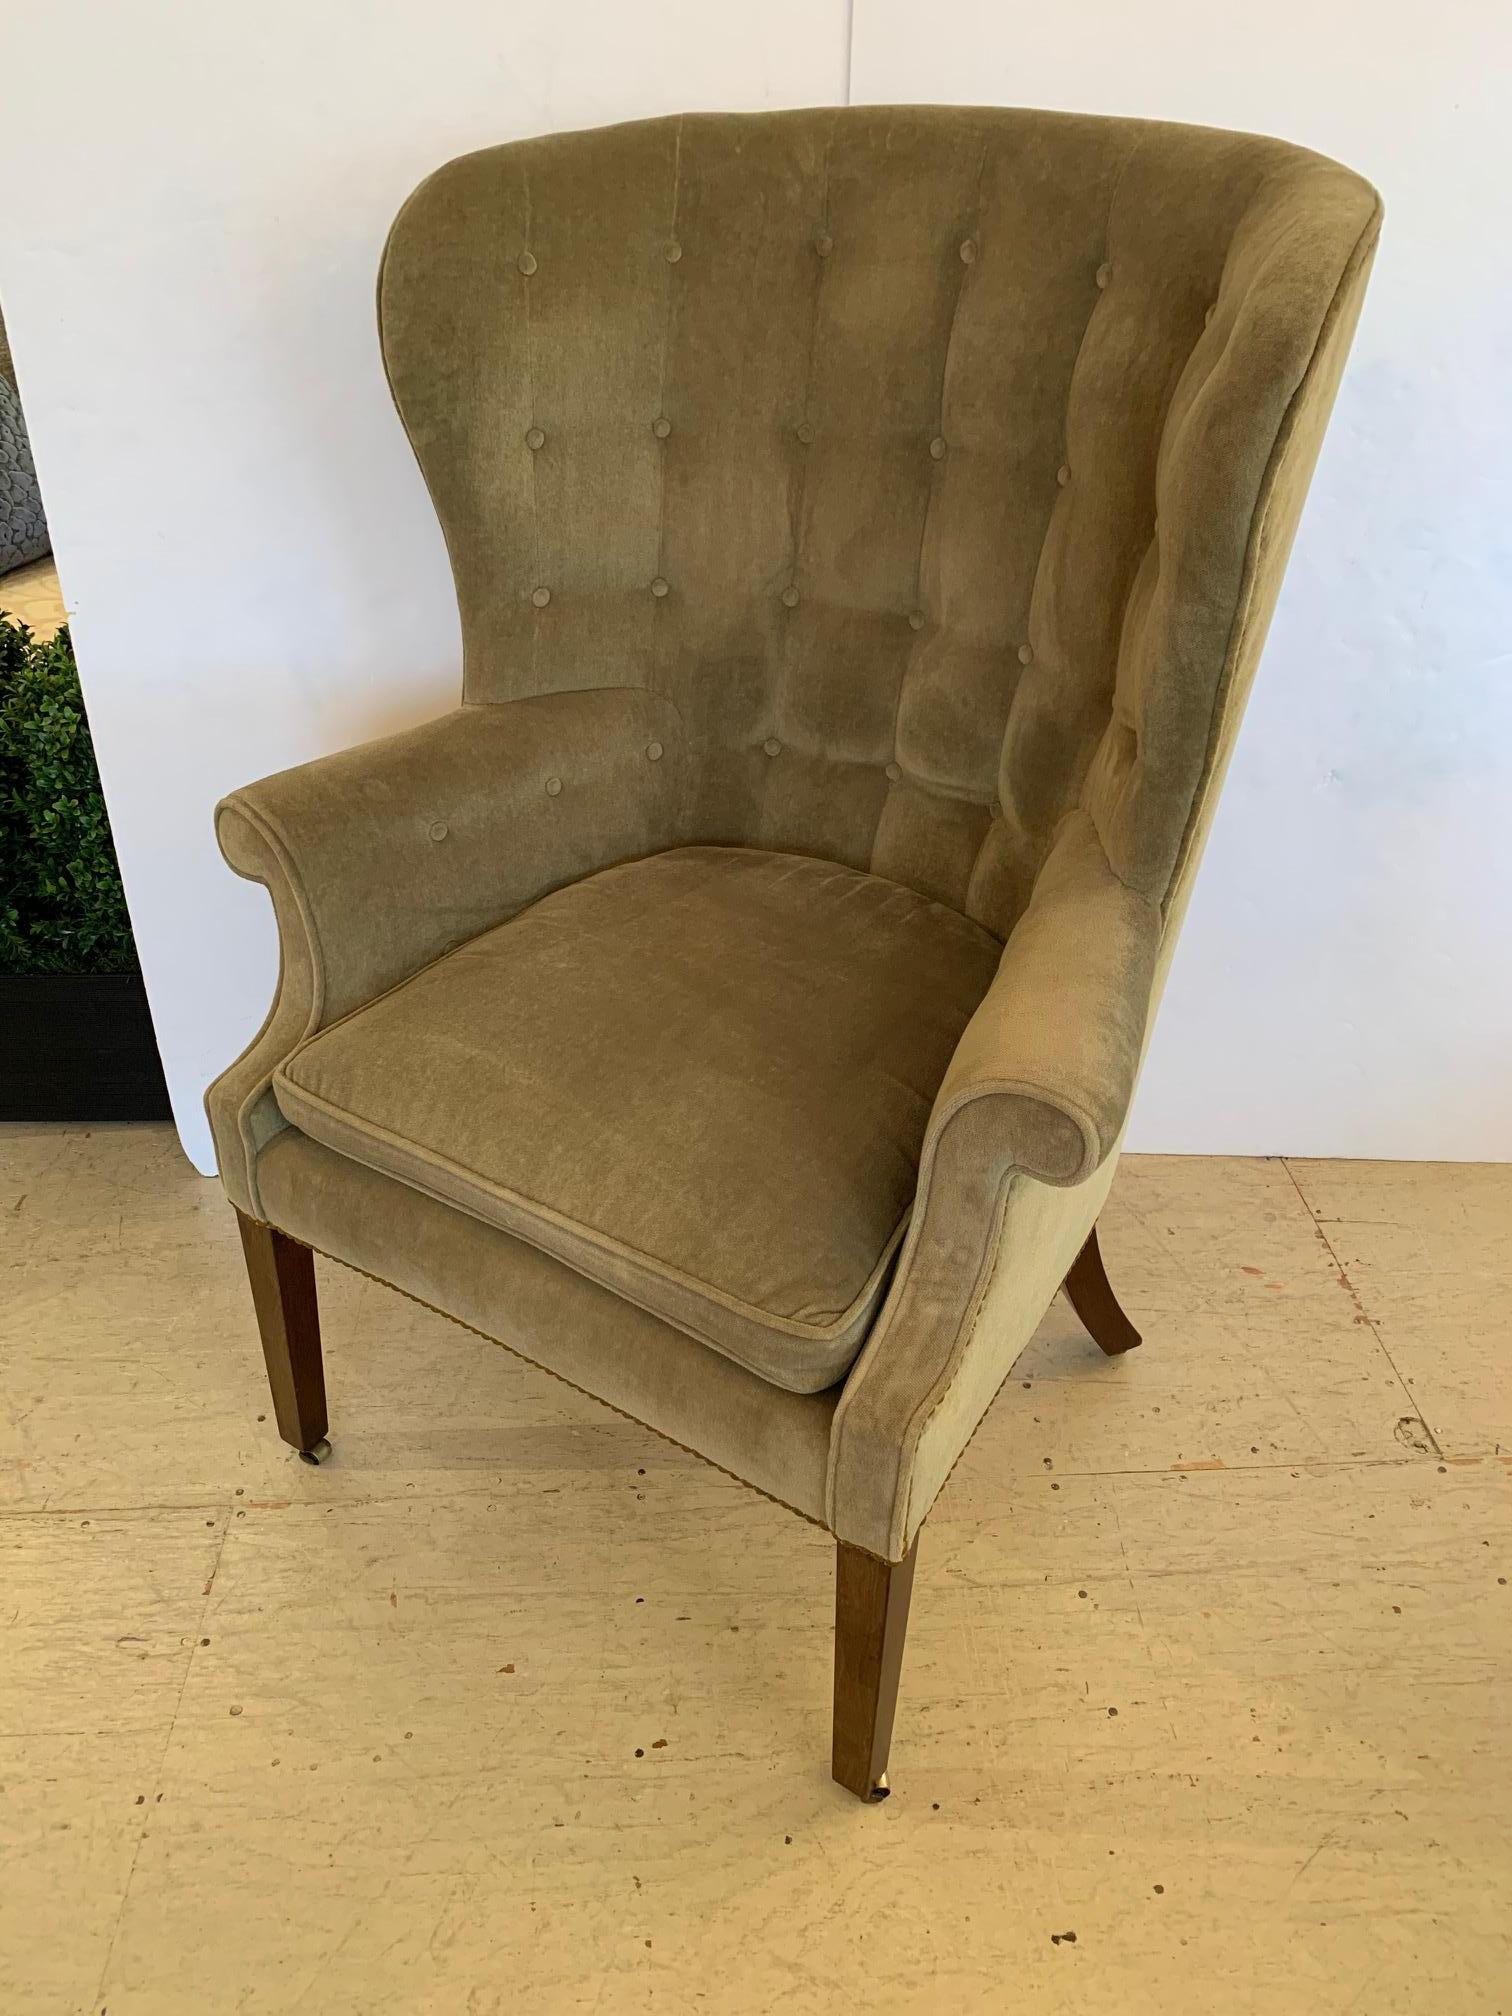 Elegant vintage tufted barrel back wing club chair upholstered in sumptuous sage green velvet and finished with brass nailheads. Mahogany legs are tapered and terminate in brass casters.
Measures: Arm 27 H
Seat 22 D.